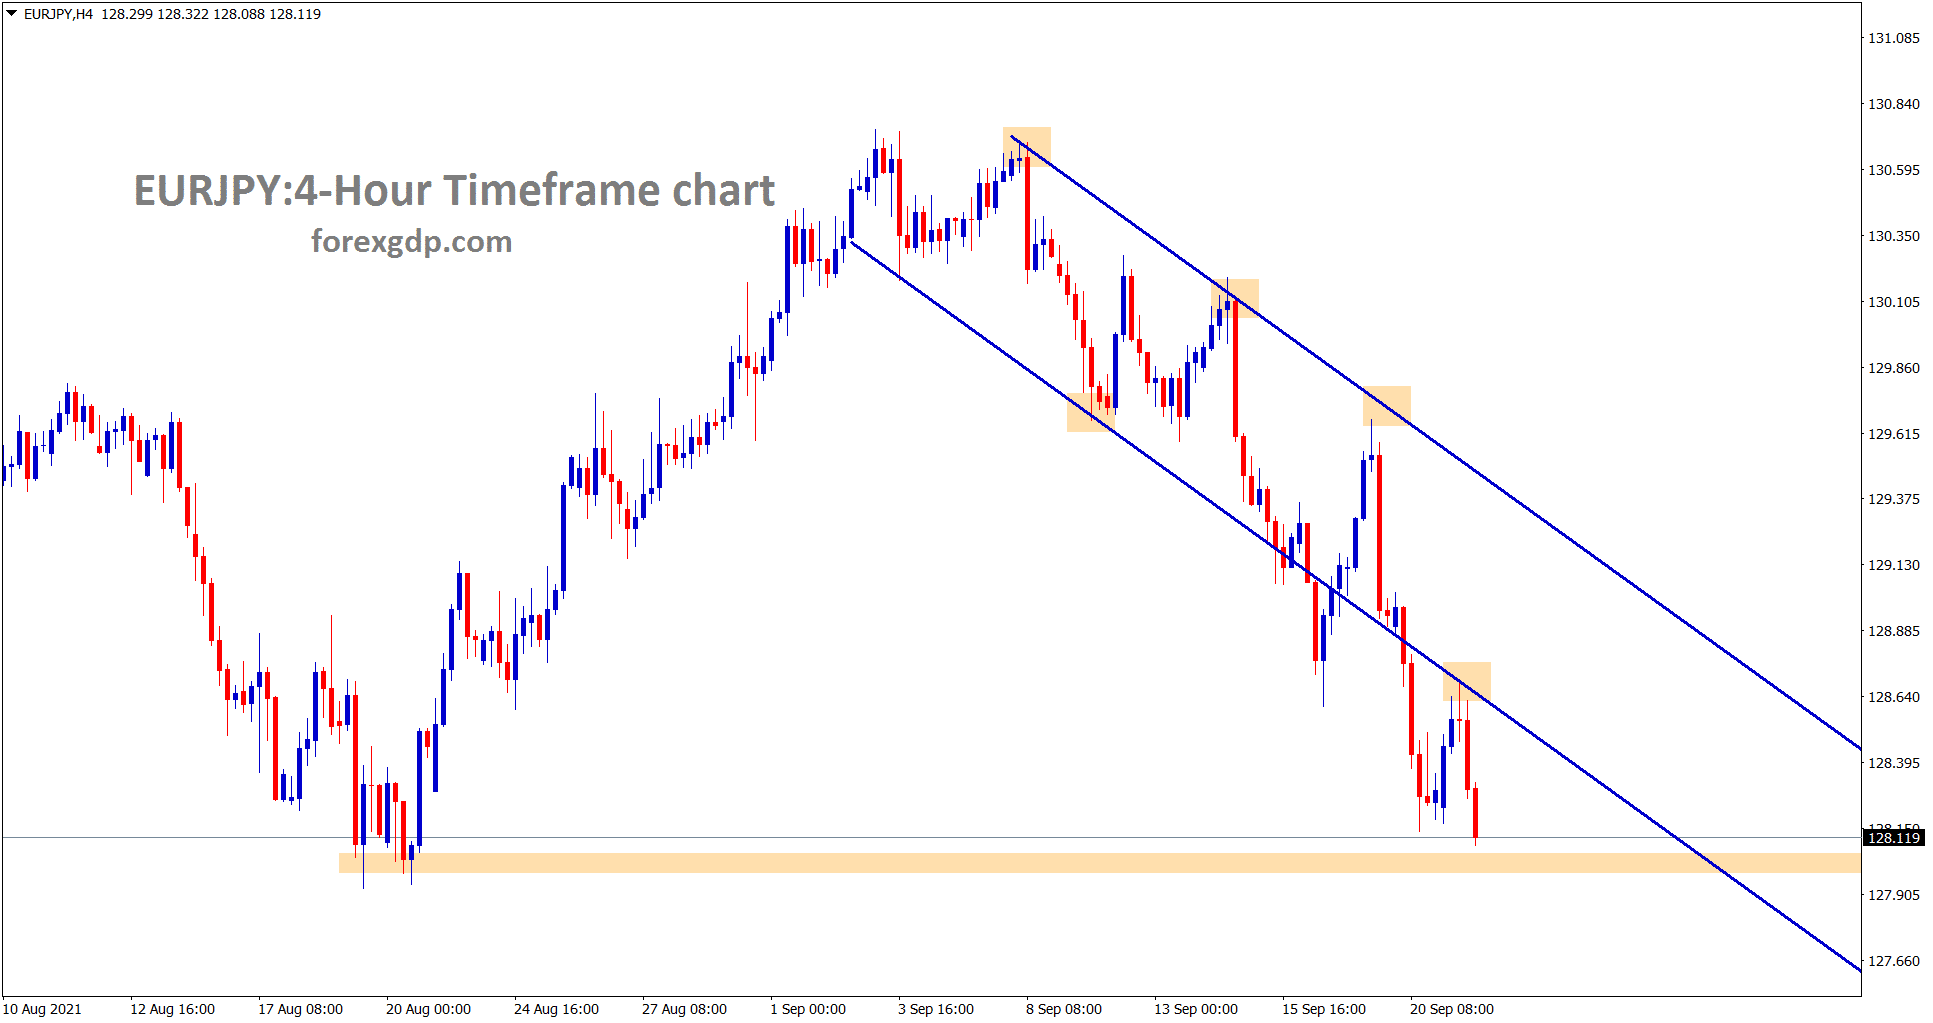 EURJPY is going to reach the horizontal support area wait for reversal or breakout